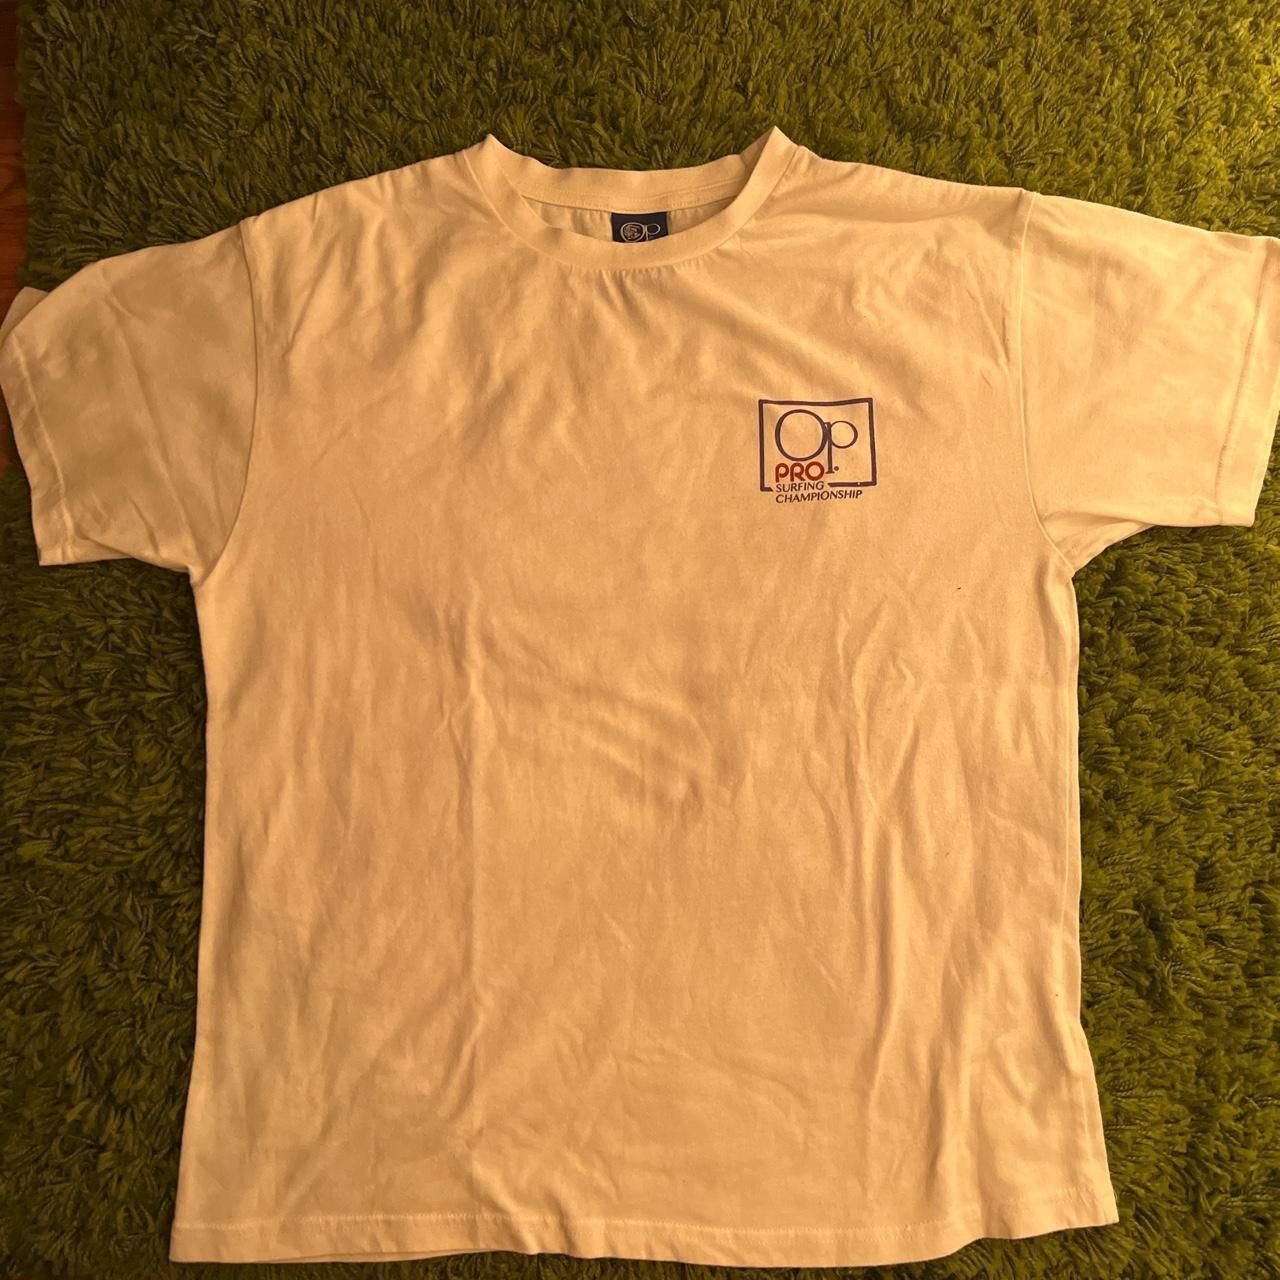 Ocean Pacific Pro surfing championship shirt! this... - Depop